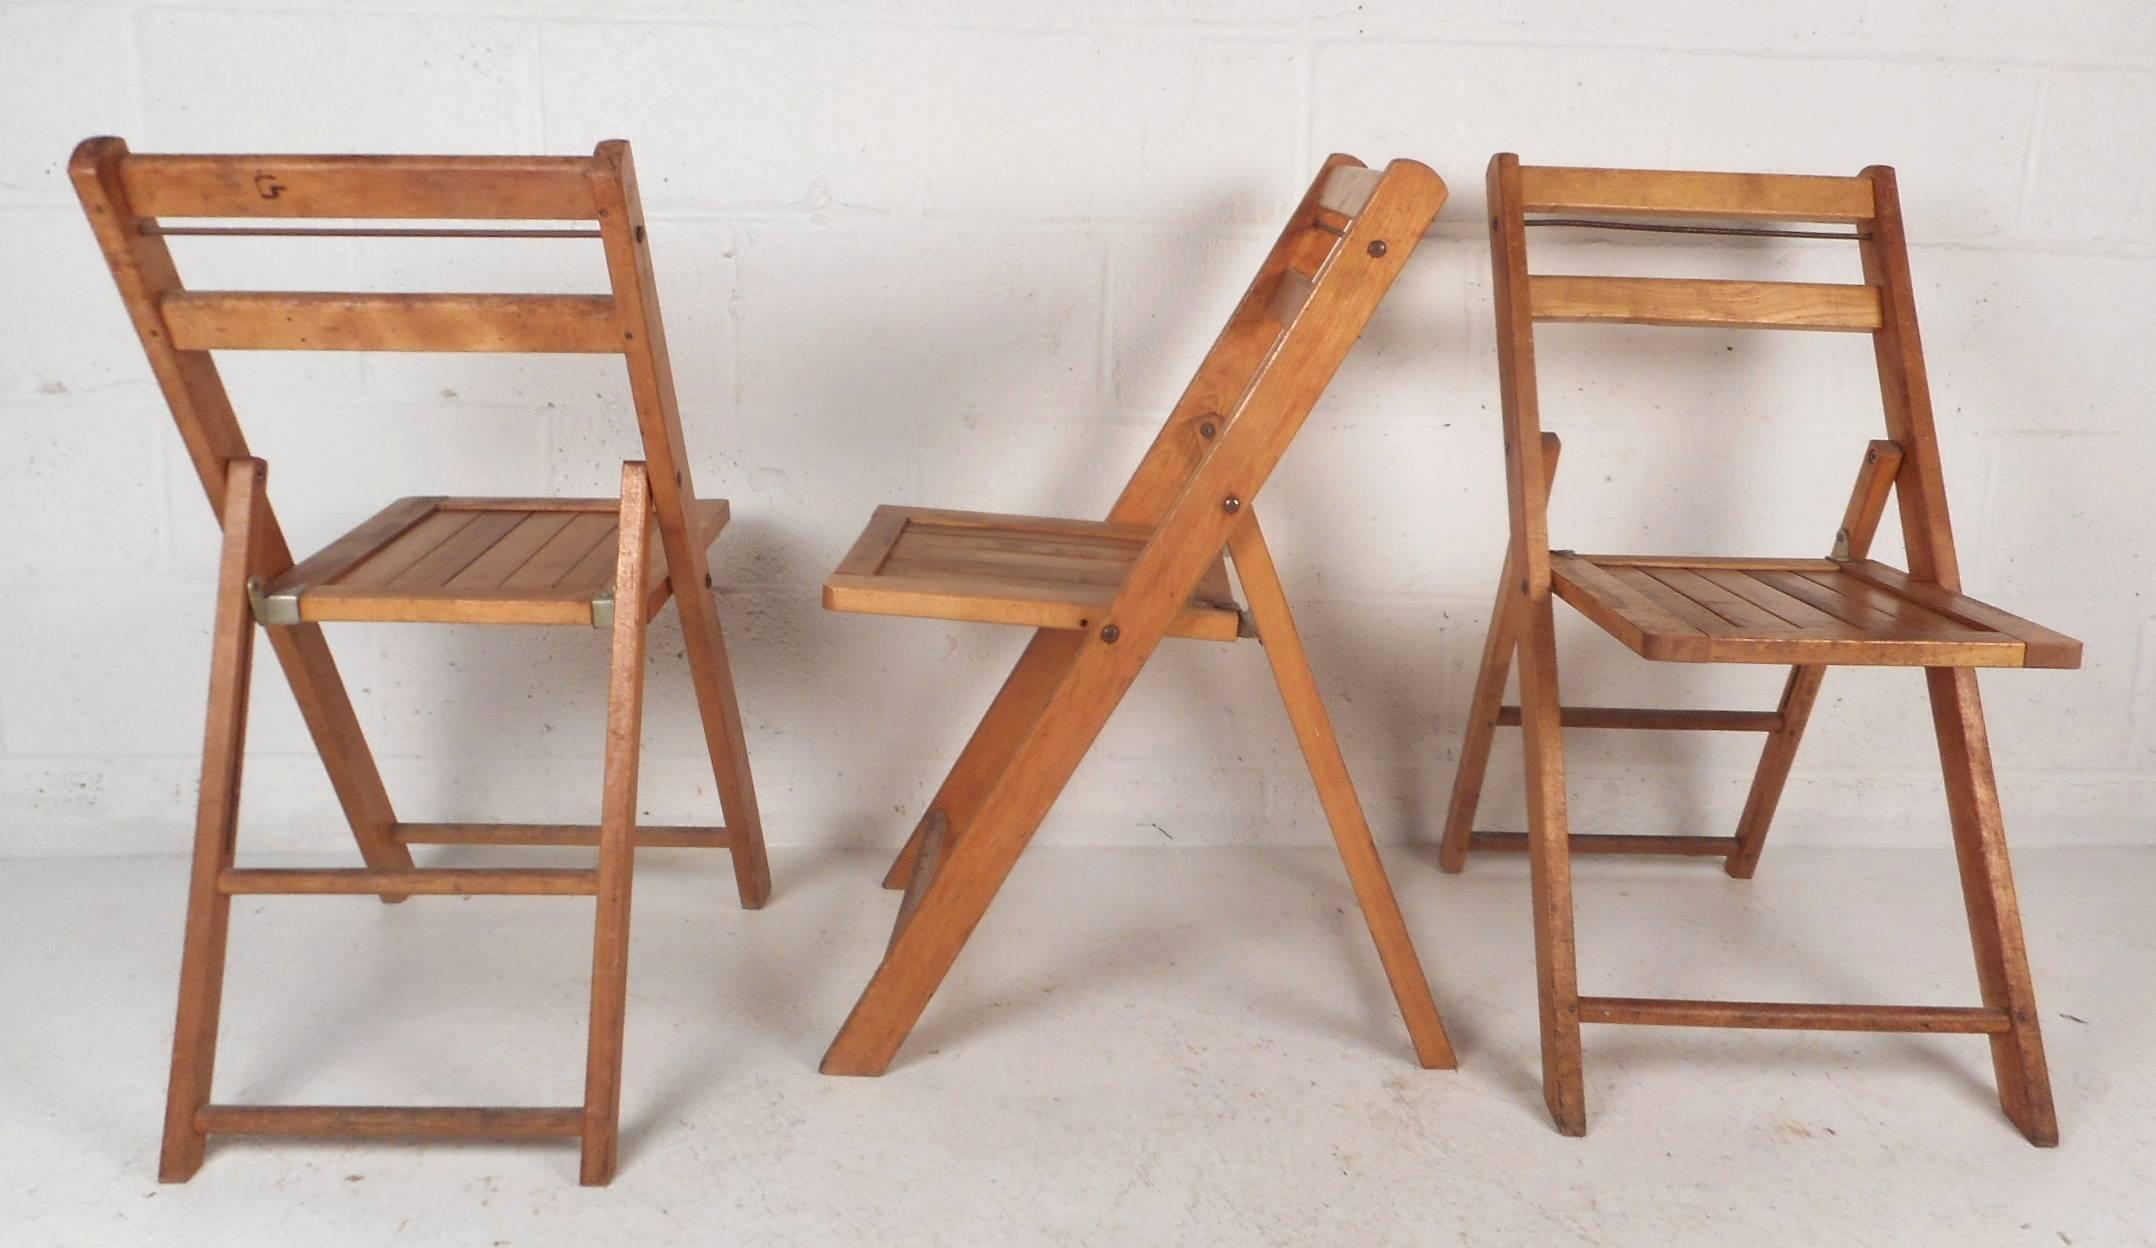 ***Each chair is being sold individually***

Stylish Mid-Century Modern collapsible chairs with slatted seats and angled legs. These beautiful hall chairs are extremely comfortable with the convenience of easy storage. The solid blonde colored wood